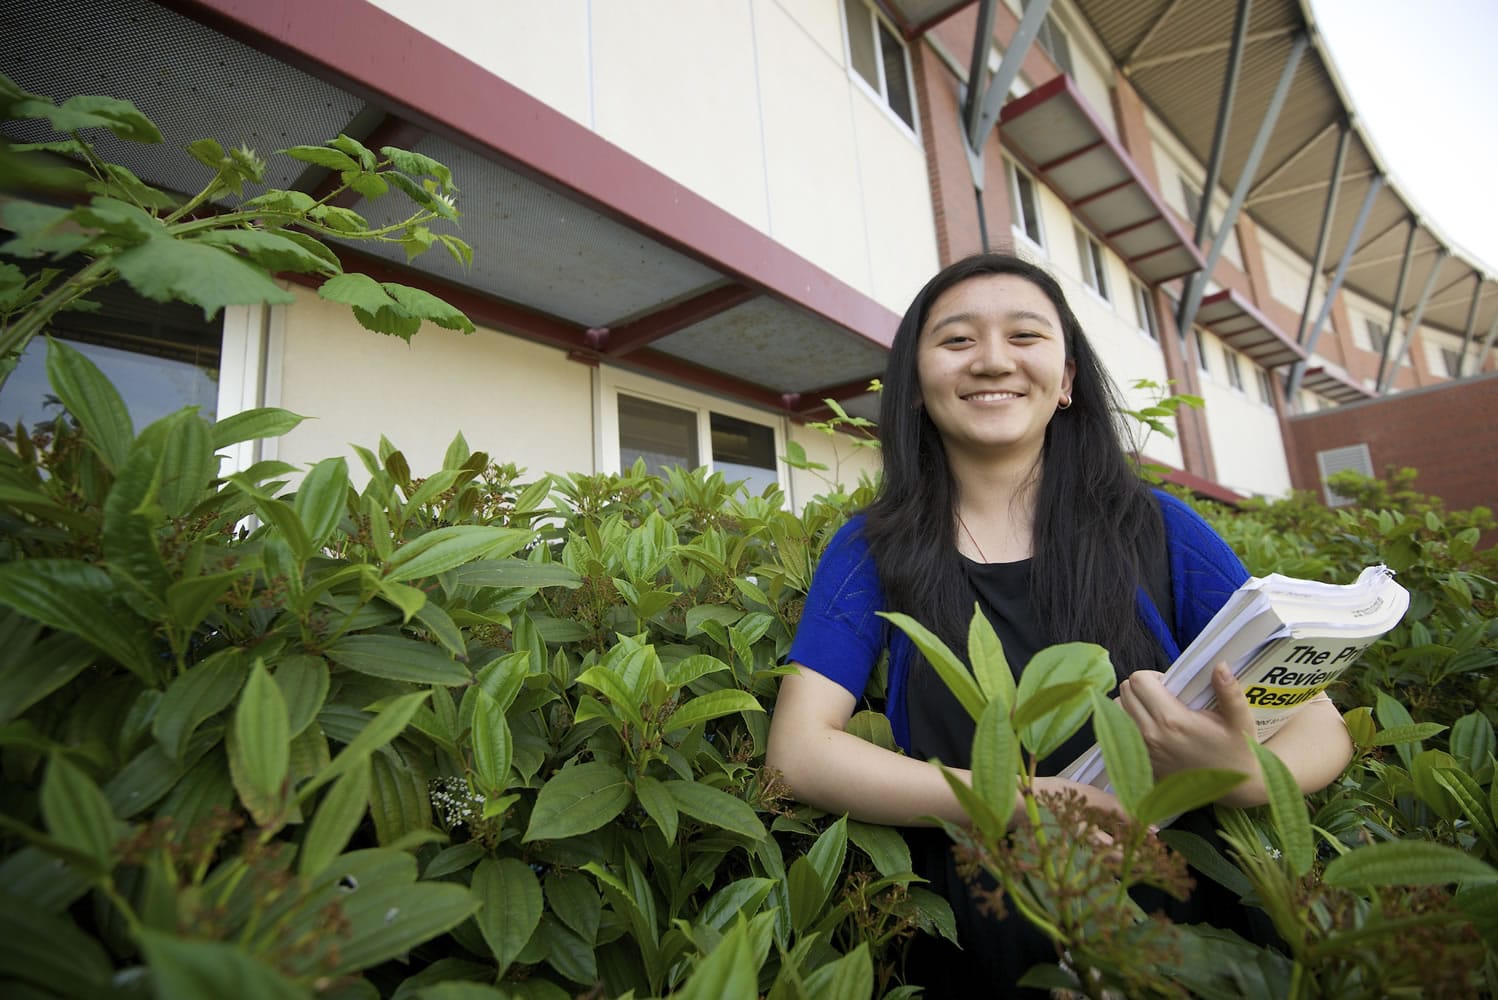 Tenzin Lama, 19, a graduating senior at Camas High School, stands outside the school Friday May 10, 2013. Lama emigrated to the United States from Tibet and wants to study medicine, with her goal being to help underserved parts of the U.S. Friday May 10, 2013.